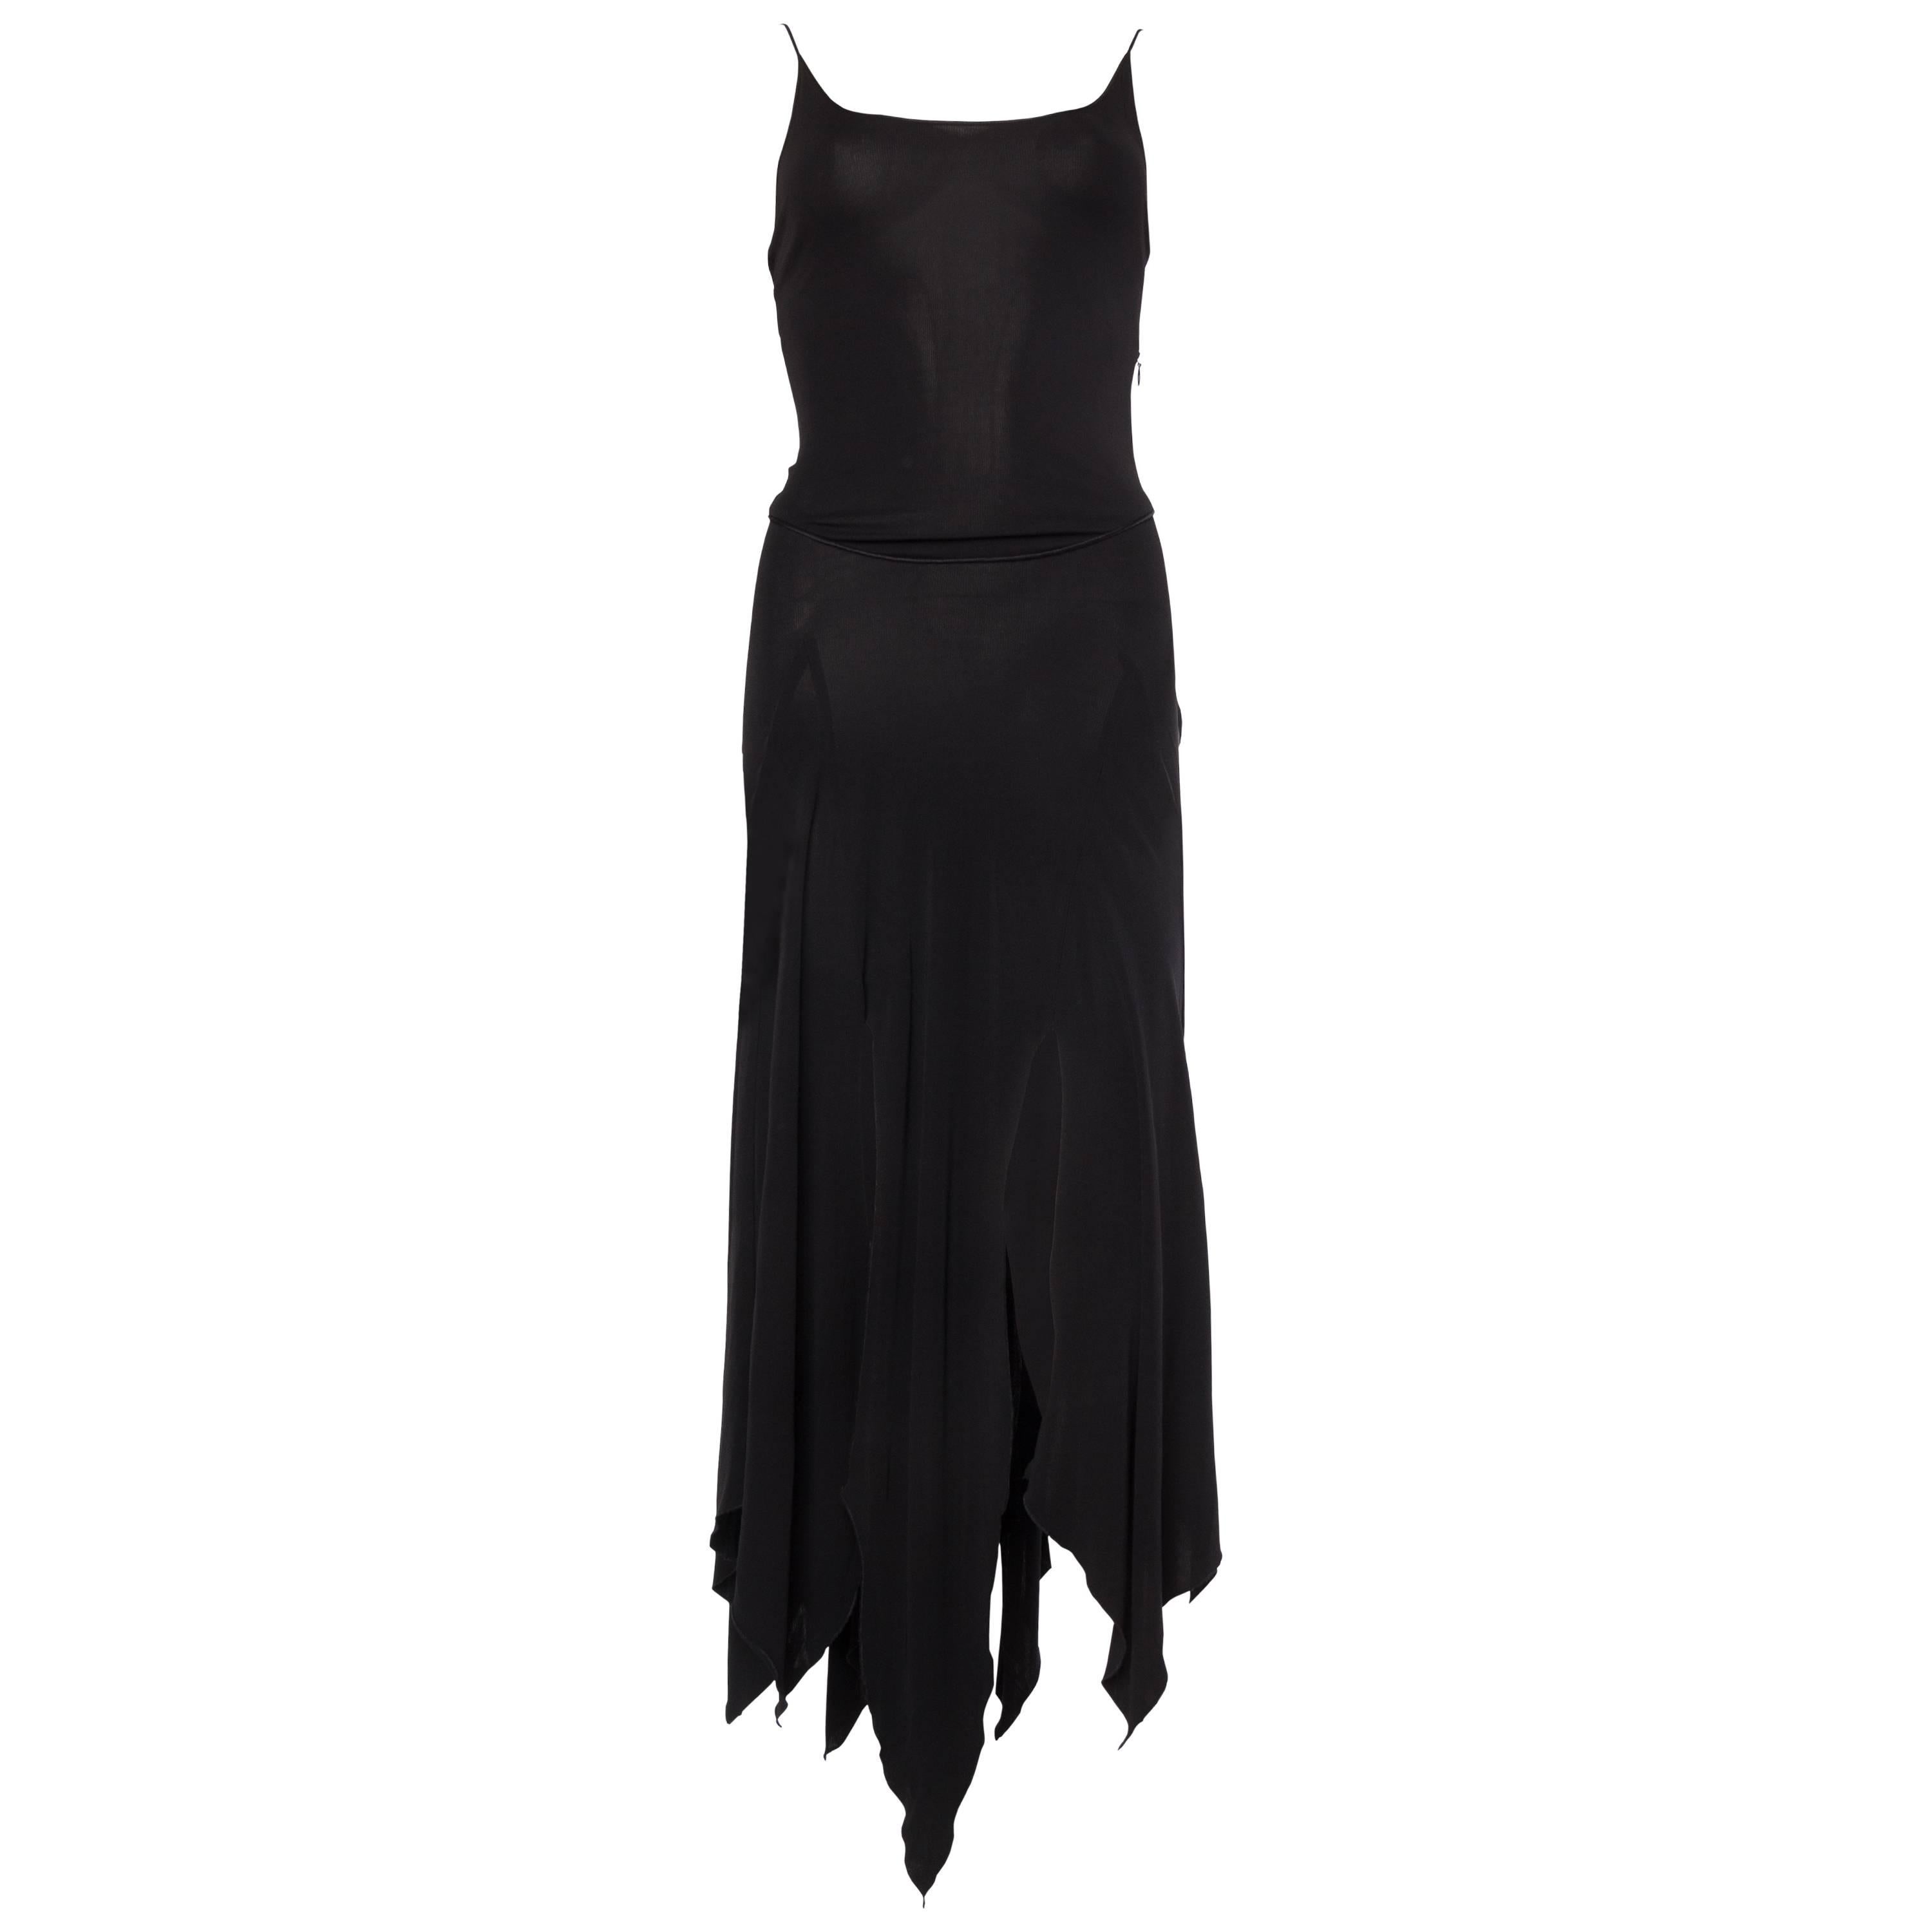 Givenchy Spandex Dancer Style Dress with High Slits